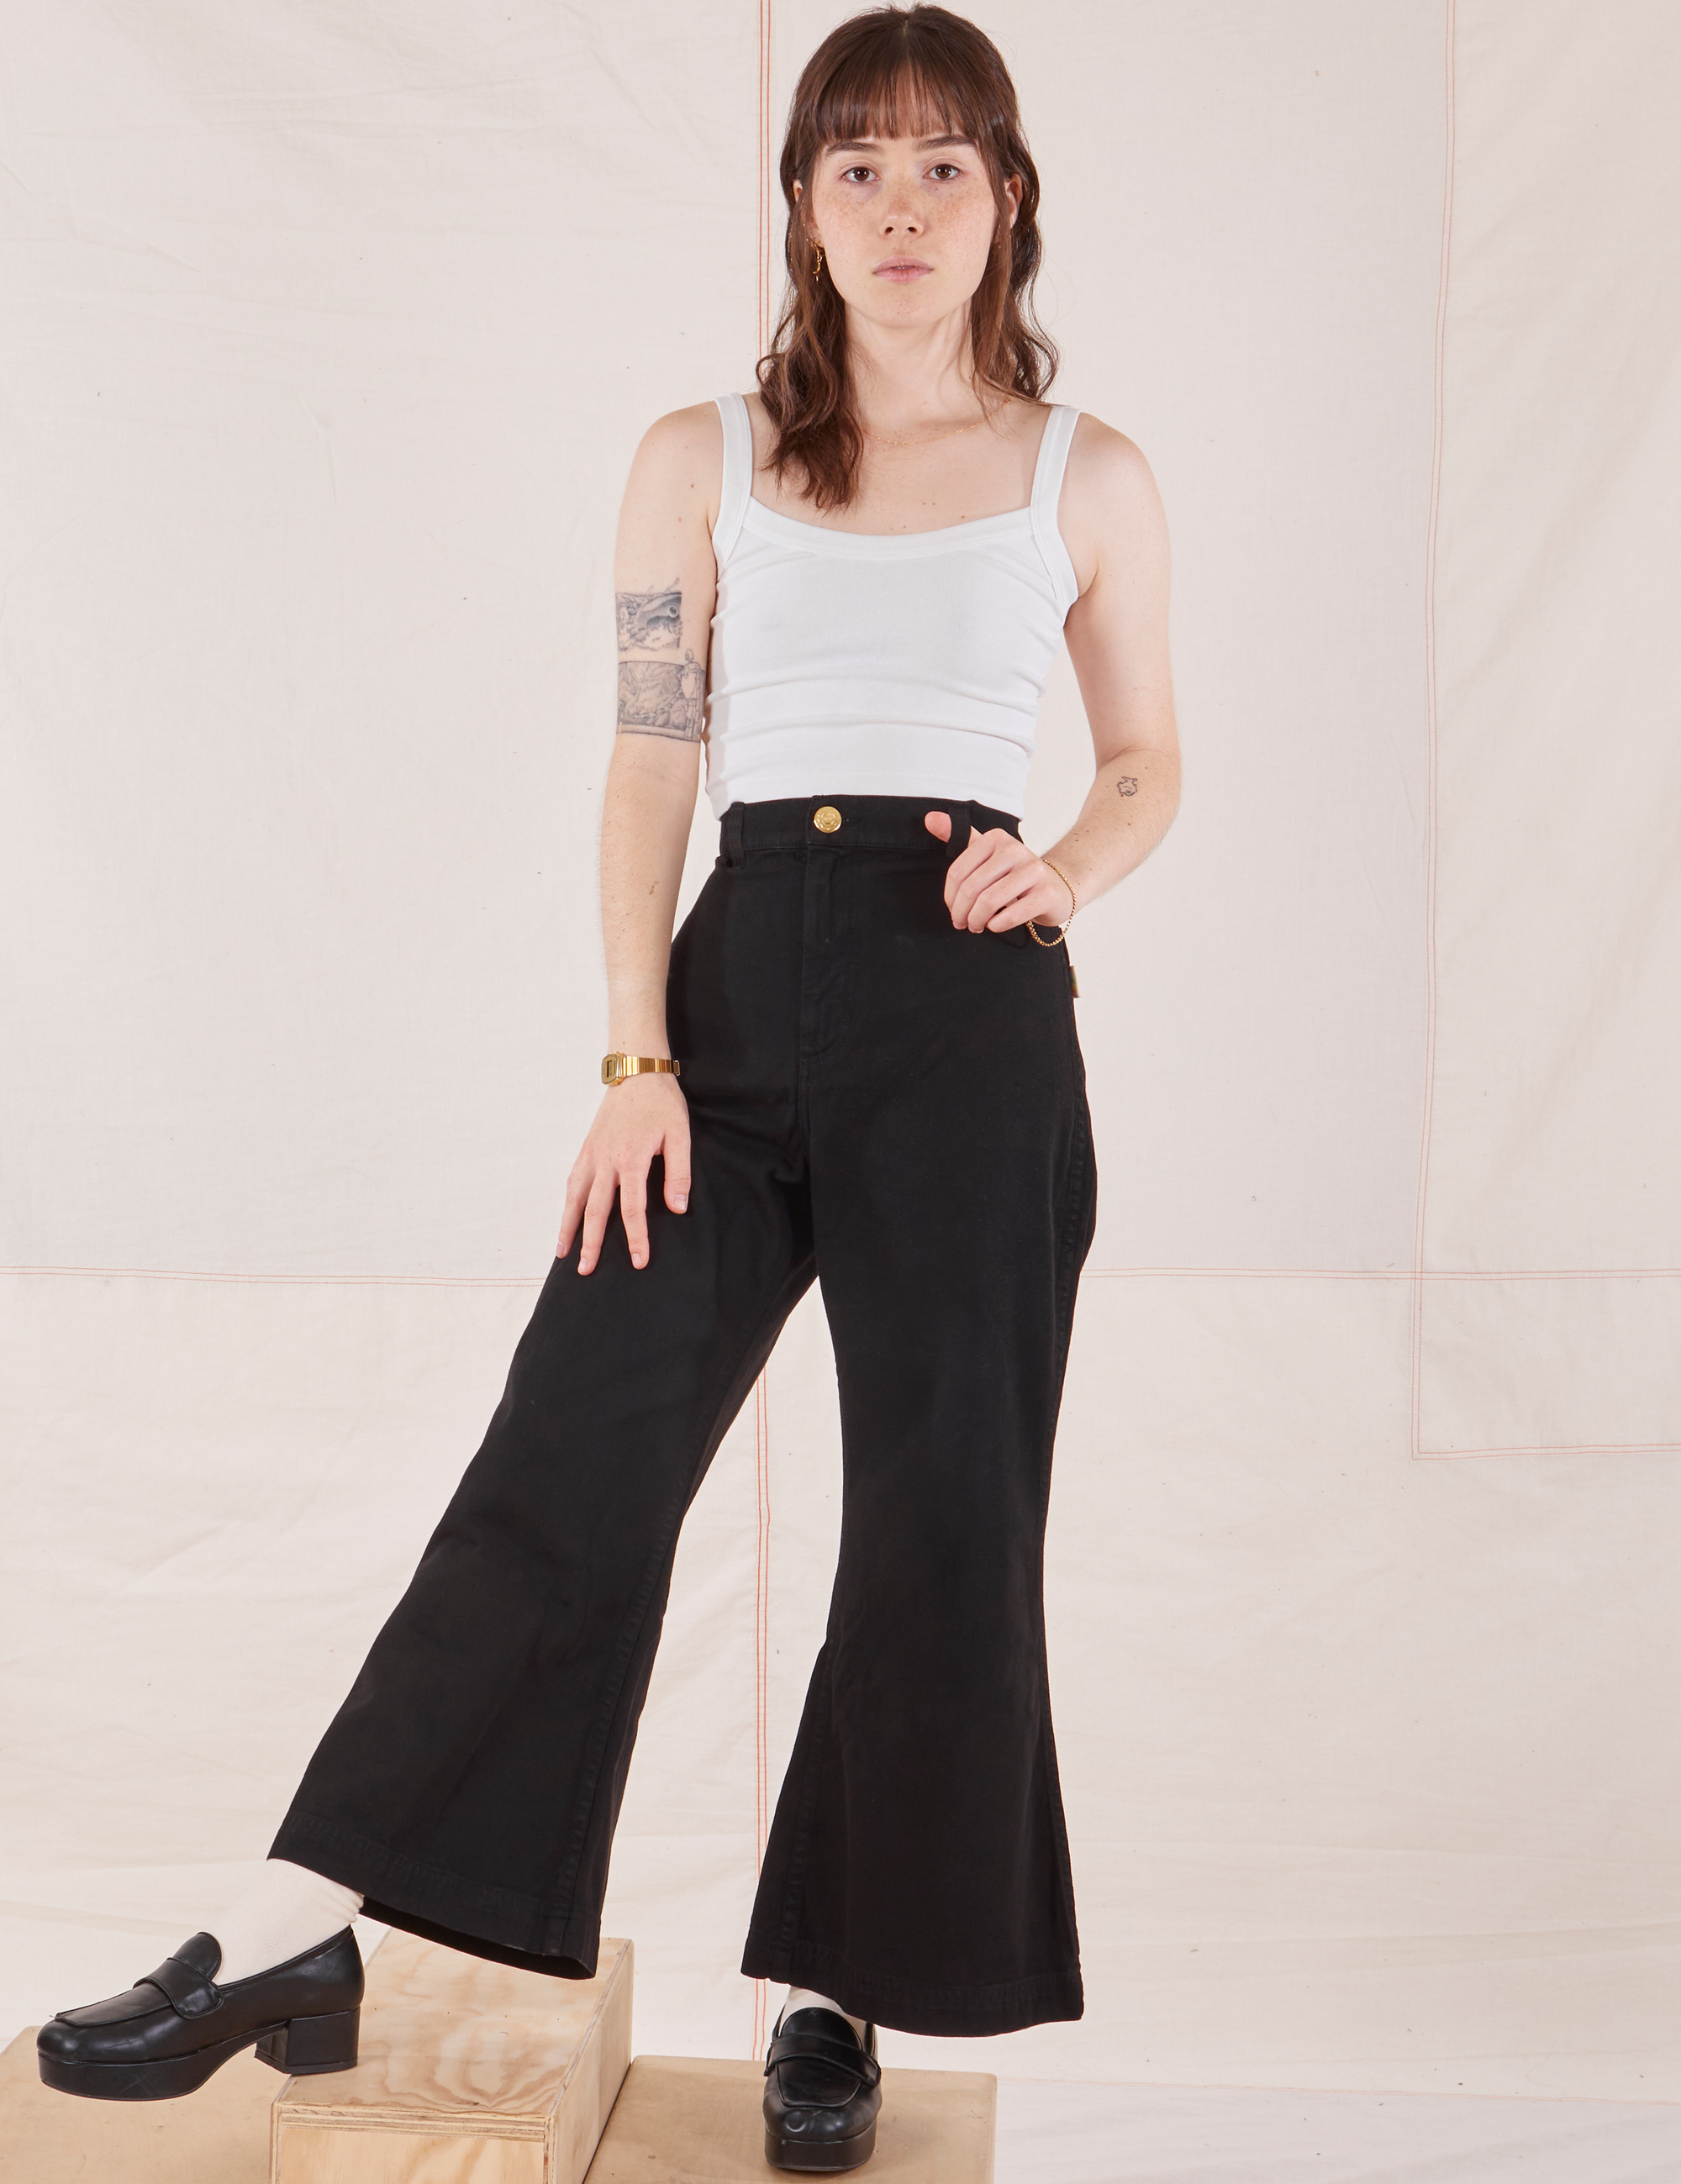 Hana is 5&#39;3&quot; and wearing P Petite Bell Bottoms in Basic Black paired with Cropped Cami in vintage tee off-white